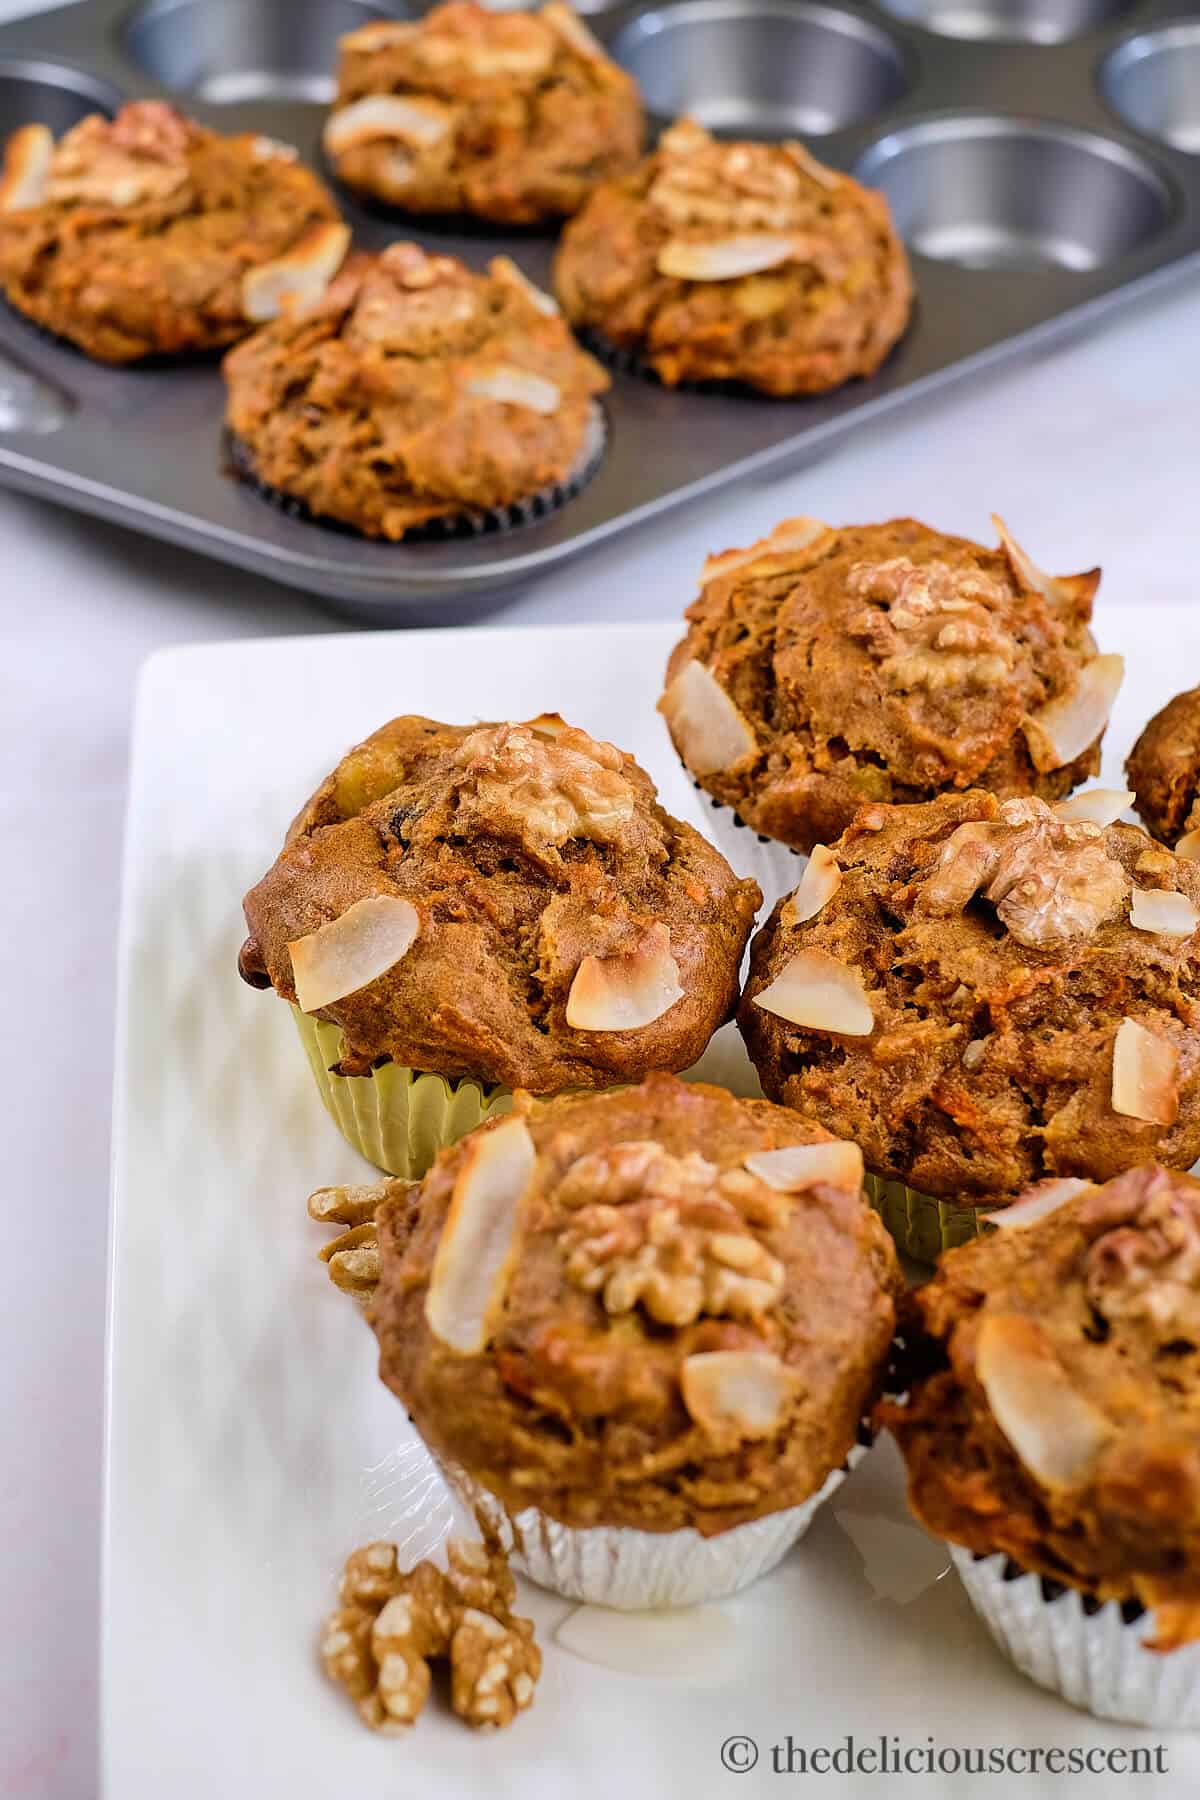 Baked healthy carrot cake muffins on a platter.